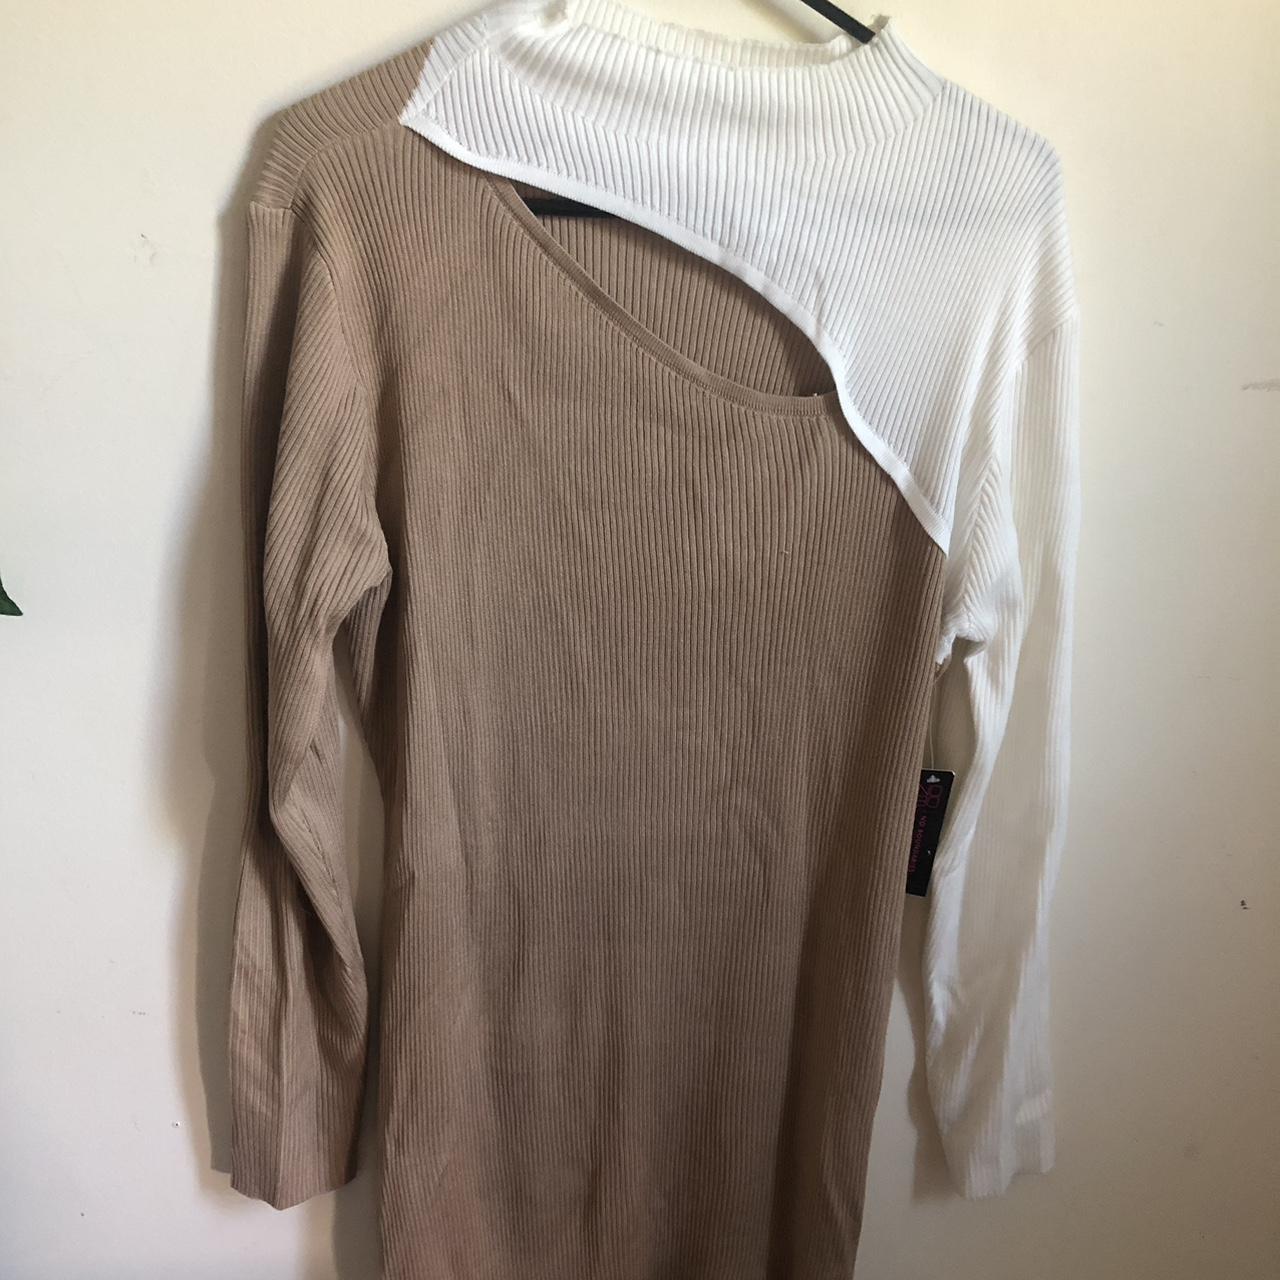 Sweater dress, has cut out design in front. Fit is - Depop